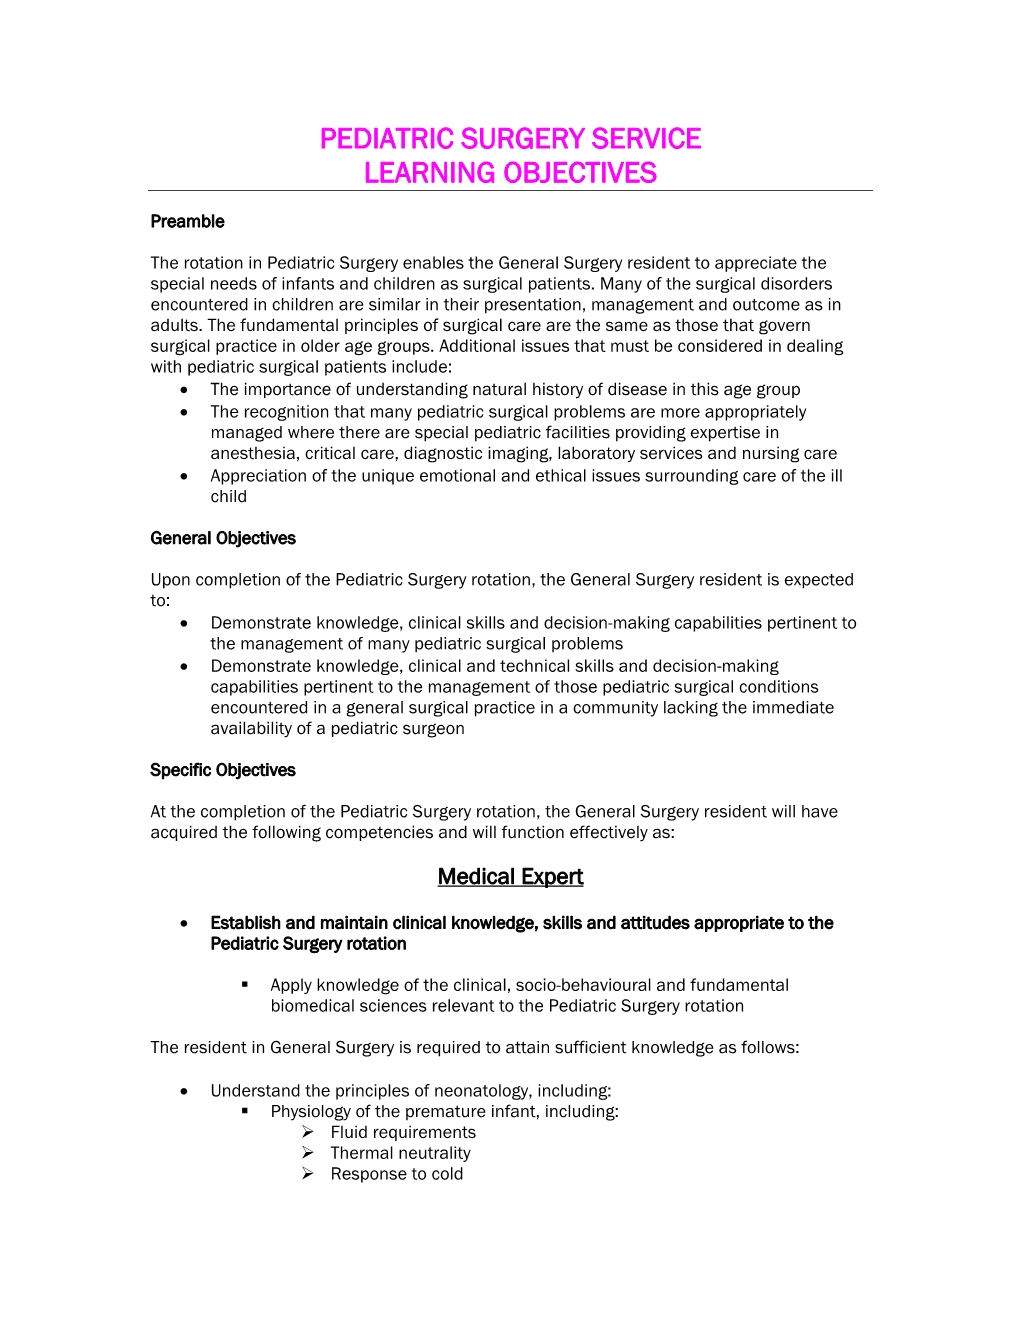 Pediatric Surgery Service Learning Objectives